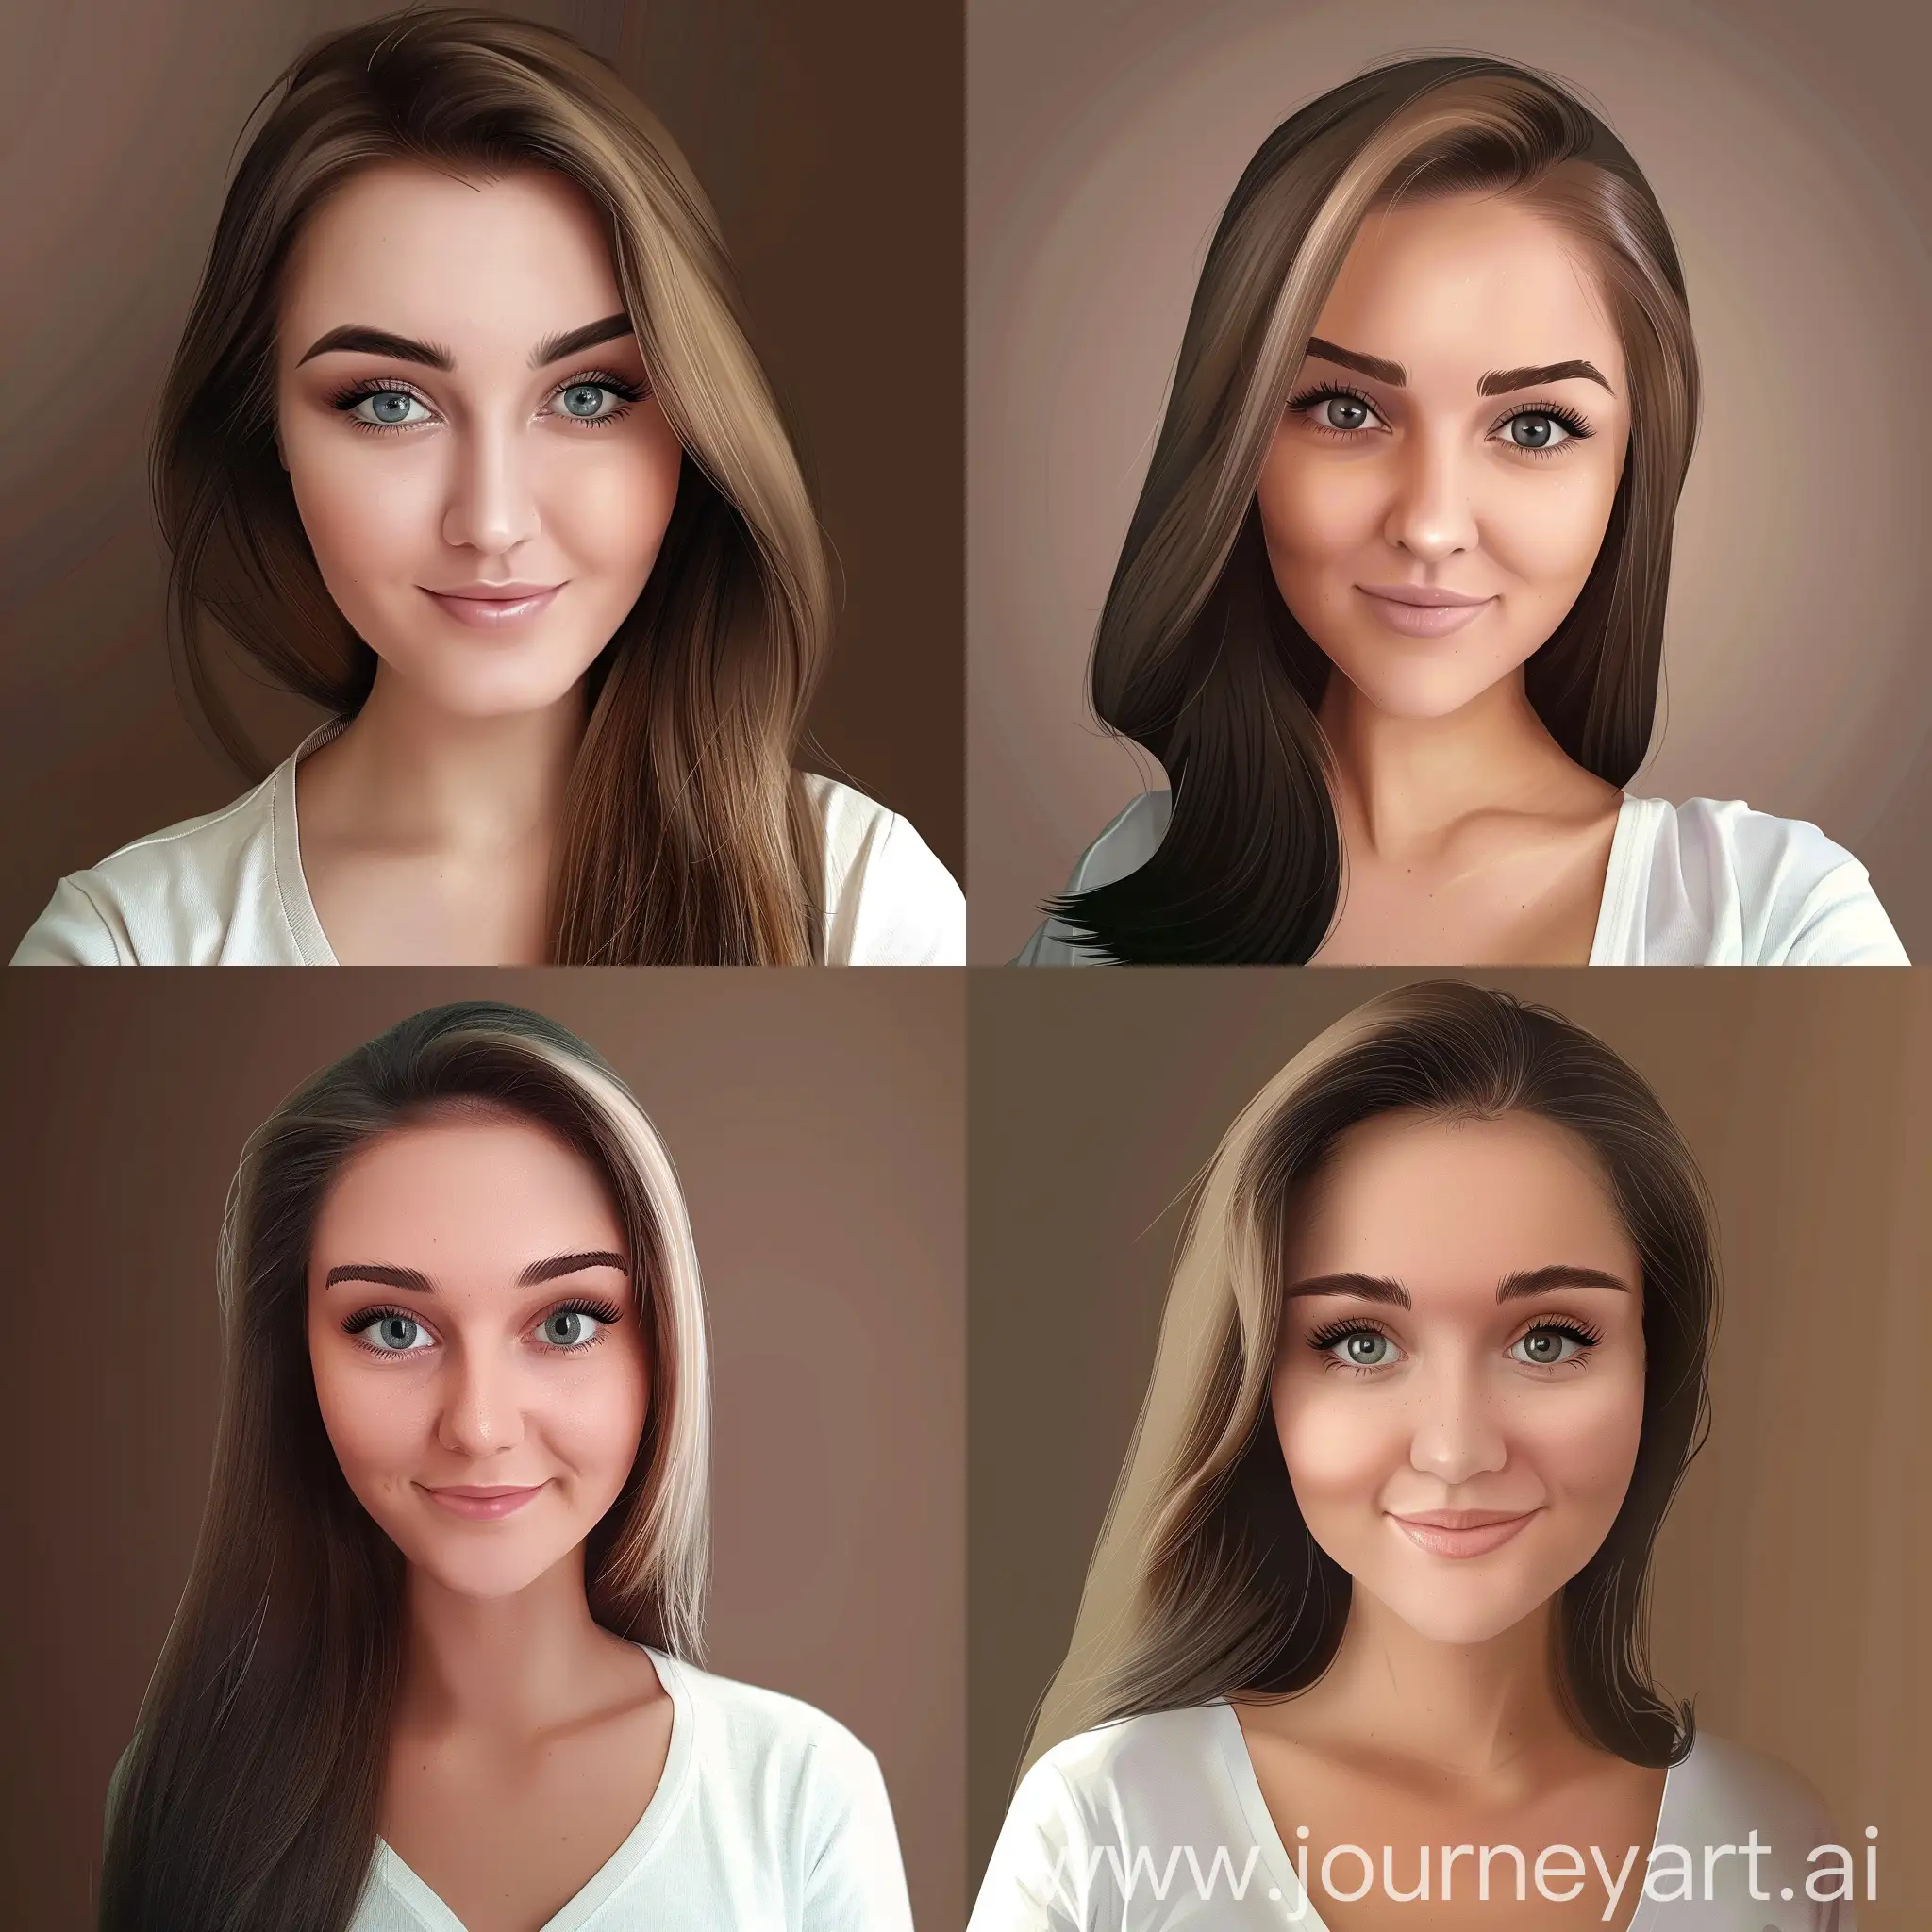 https://parsers.vc/static/img/Lina2.jpg https://parsers.vc/static/img/Lina.jpeg https://parsers.vc/static/img/Lina3.jpg https://parsers.vc/static/img/Lina4.jpg cartoon realistic happy nice woman frontal with sleek hair and brown background